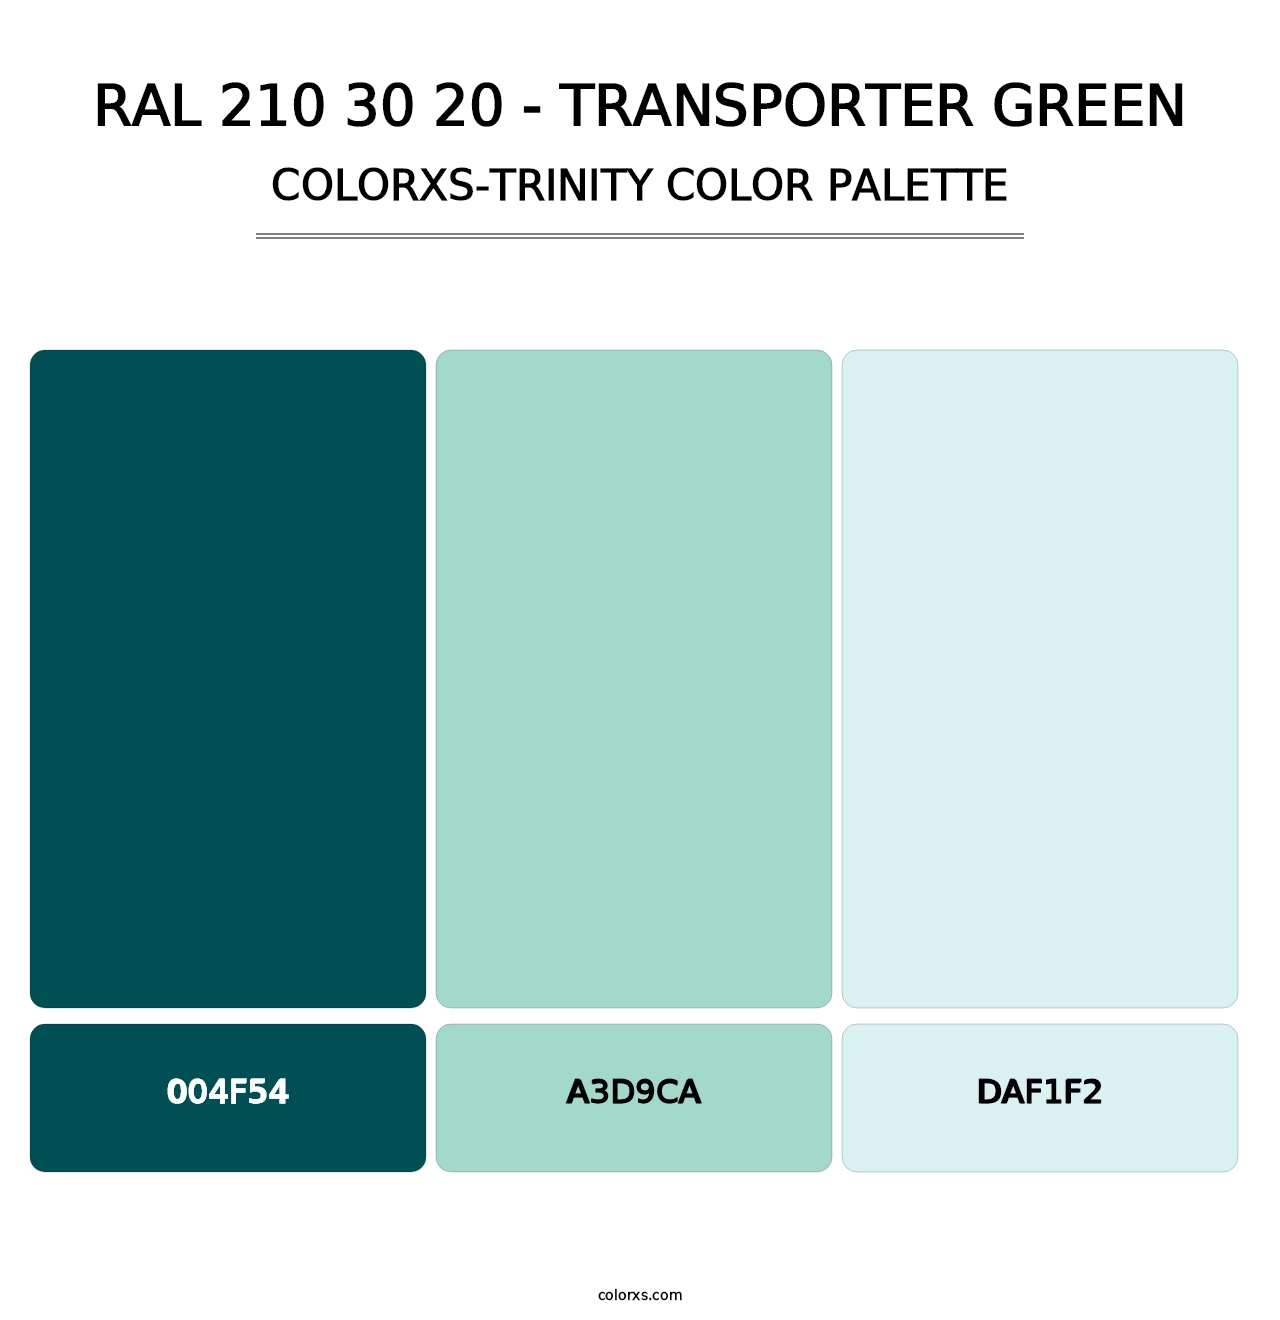 RAL 210 30 20 - Transporter Green - Colorxs Trinity Palette